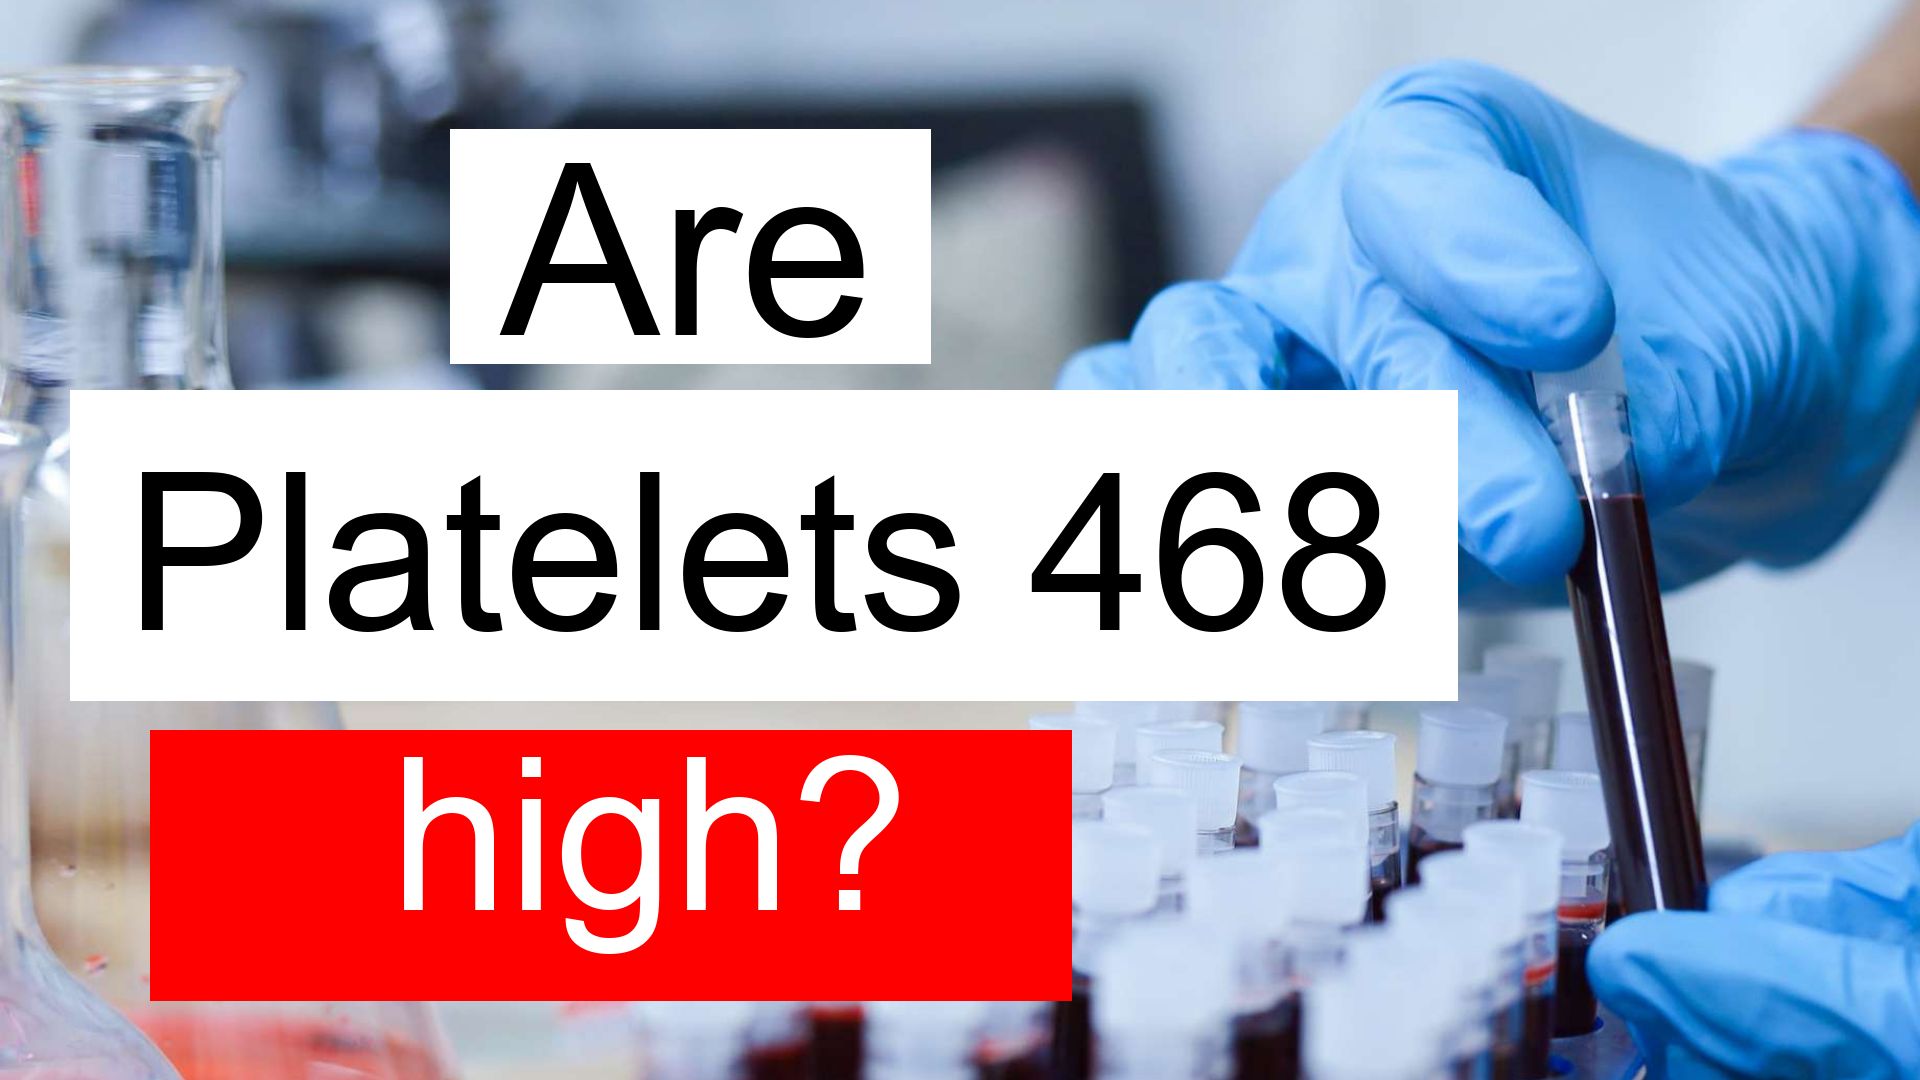 is-platelet-count-468-high-normal-or-dangerous-what-does-platelet